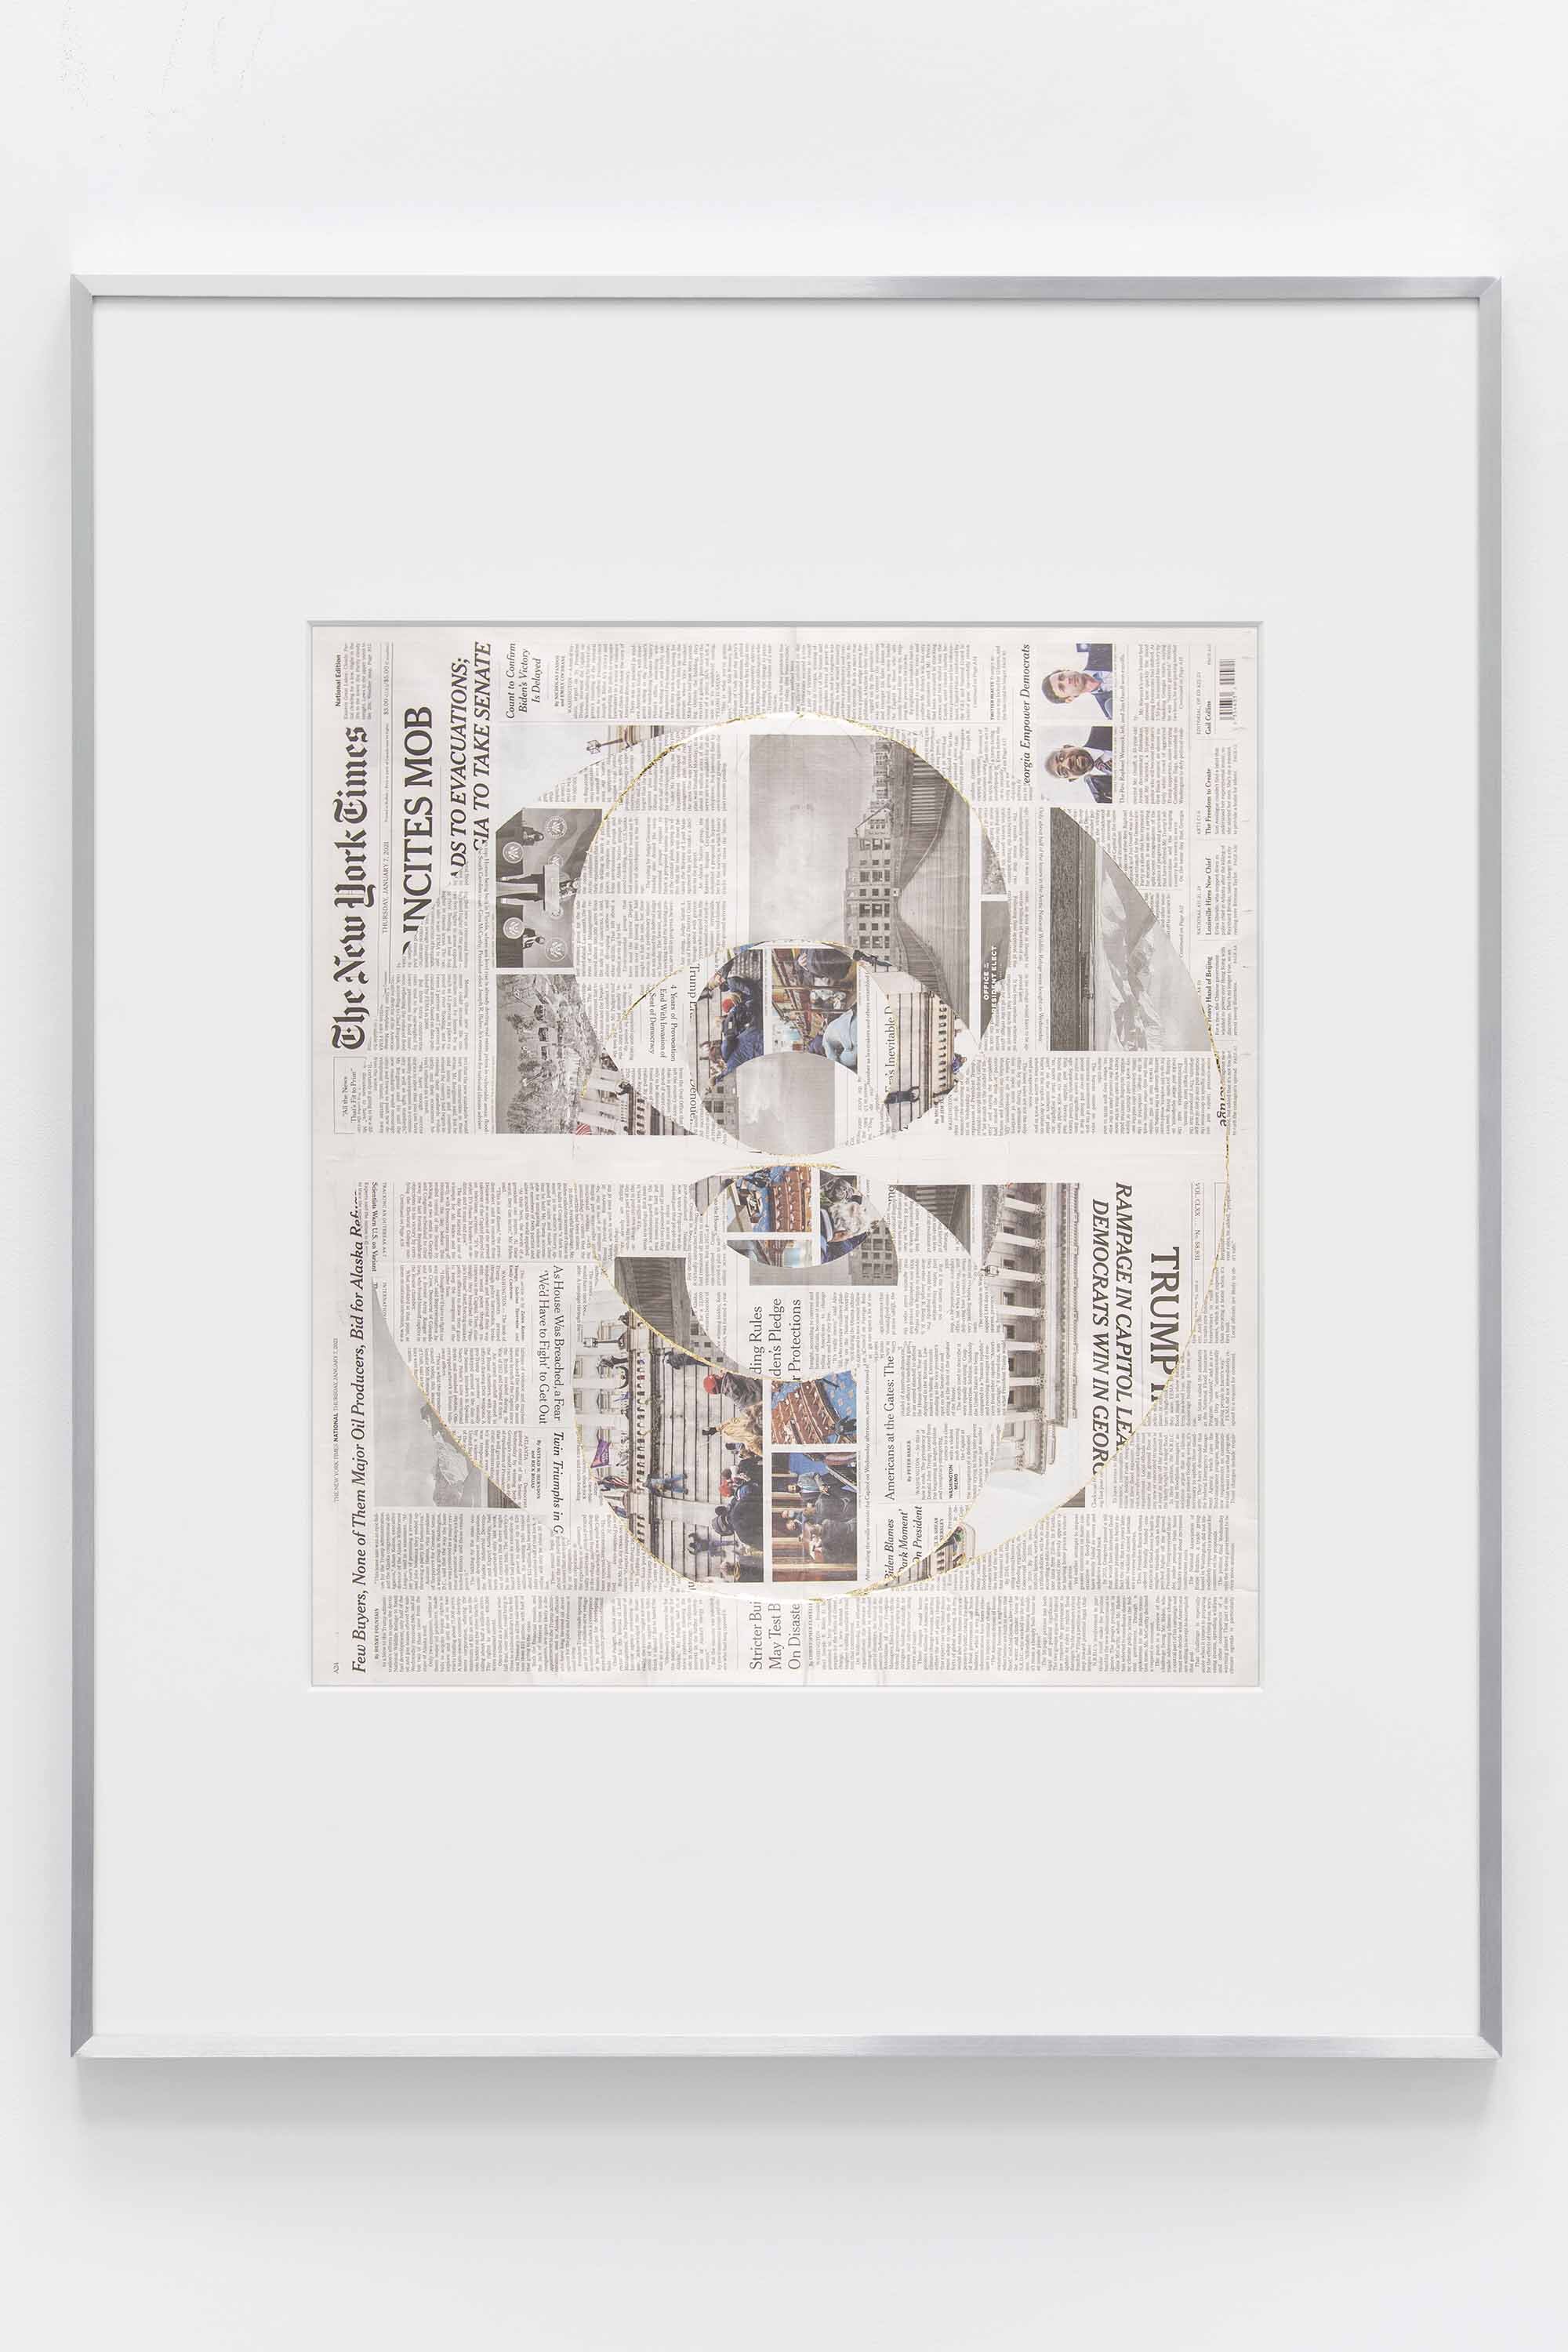   Blind Collage (Seven 180º Rotations, The New York Times: Buffalo, New York, Thursday, January 7, 2021)    2021   Newspaper, tape, and 22 karat gold leaf  39 1/8 x 31 1/4 inches  Exhibition:   Foreign Correspondence, 2021  